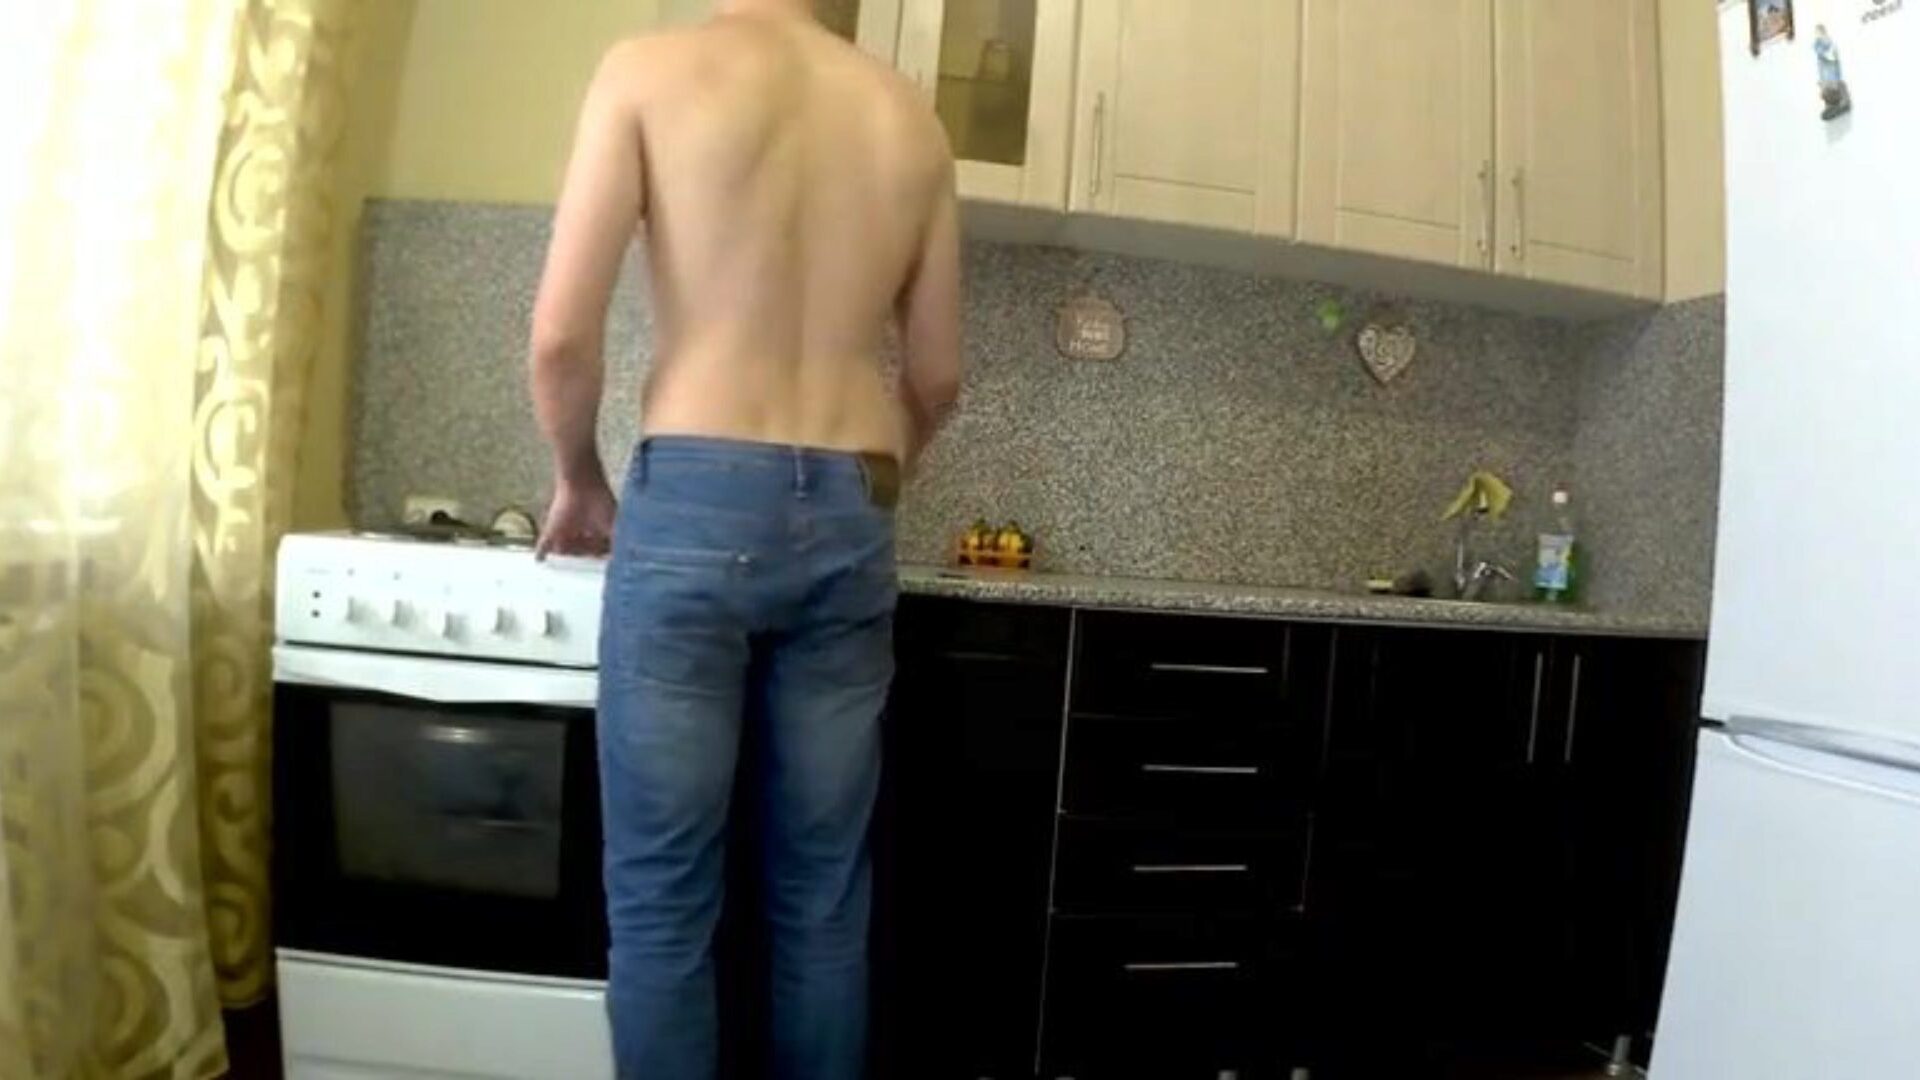 Son ass-fuck intercourse with step-mother in the kitchen. Non-Professional mommy wazoo and Orall-Service